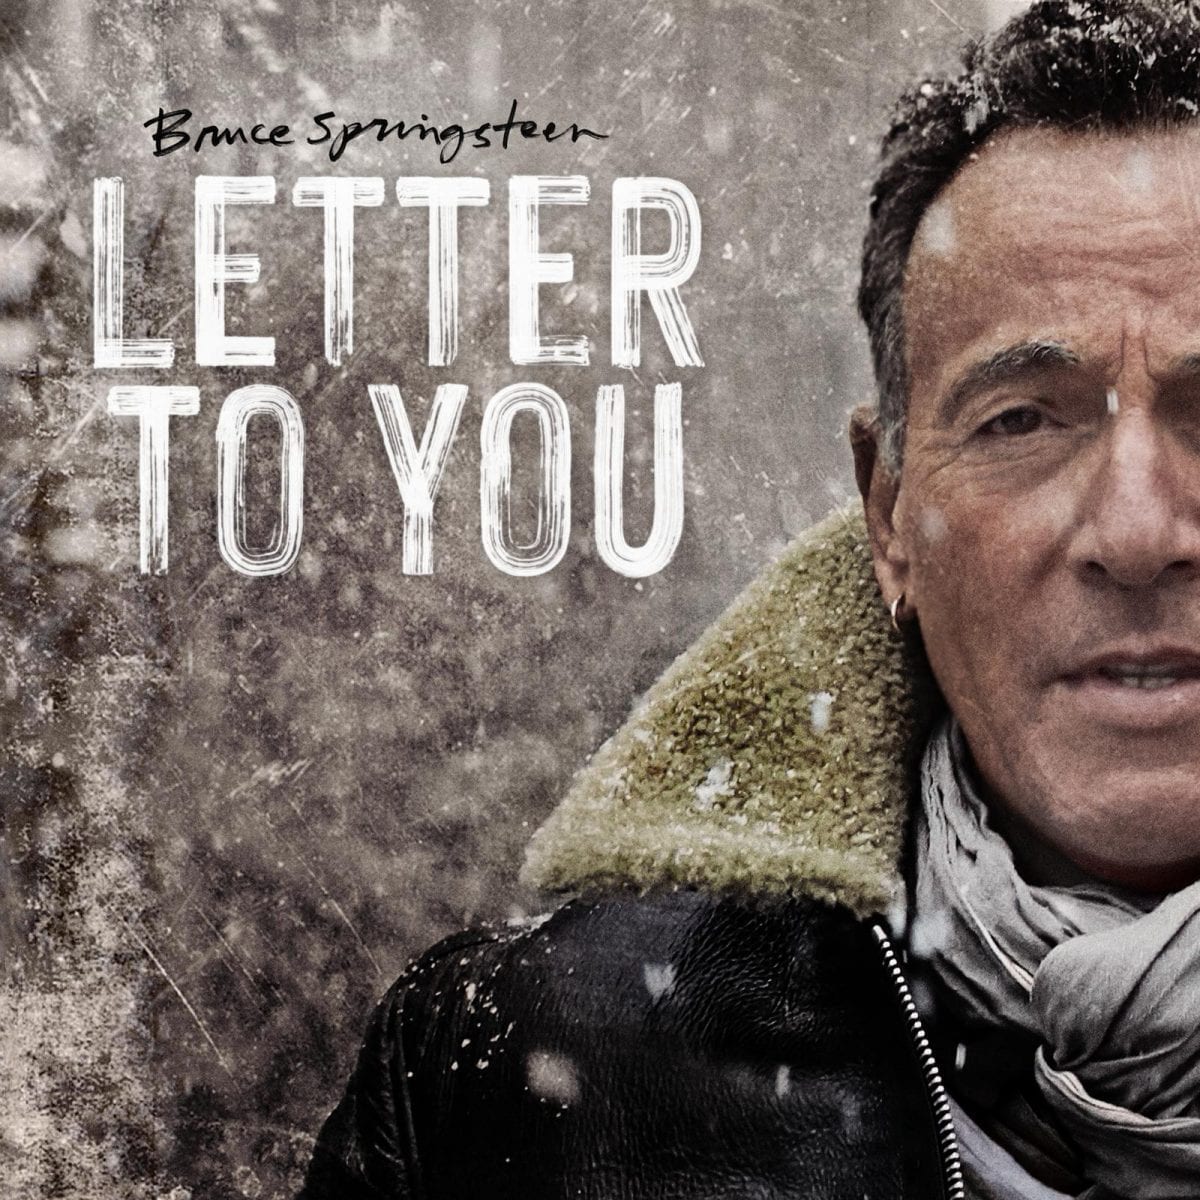 Bruce Springsteen Announces New Album with E Street Band, Releases New